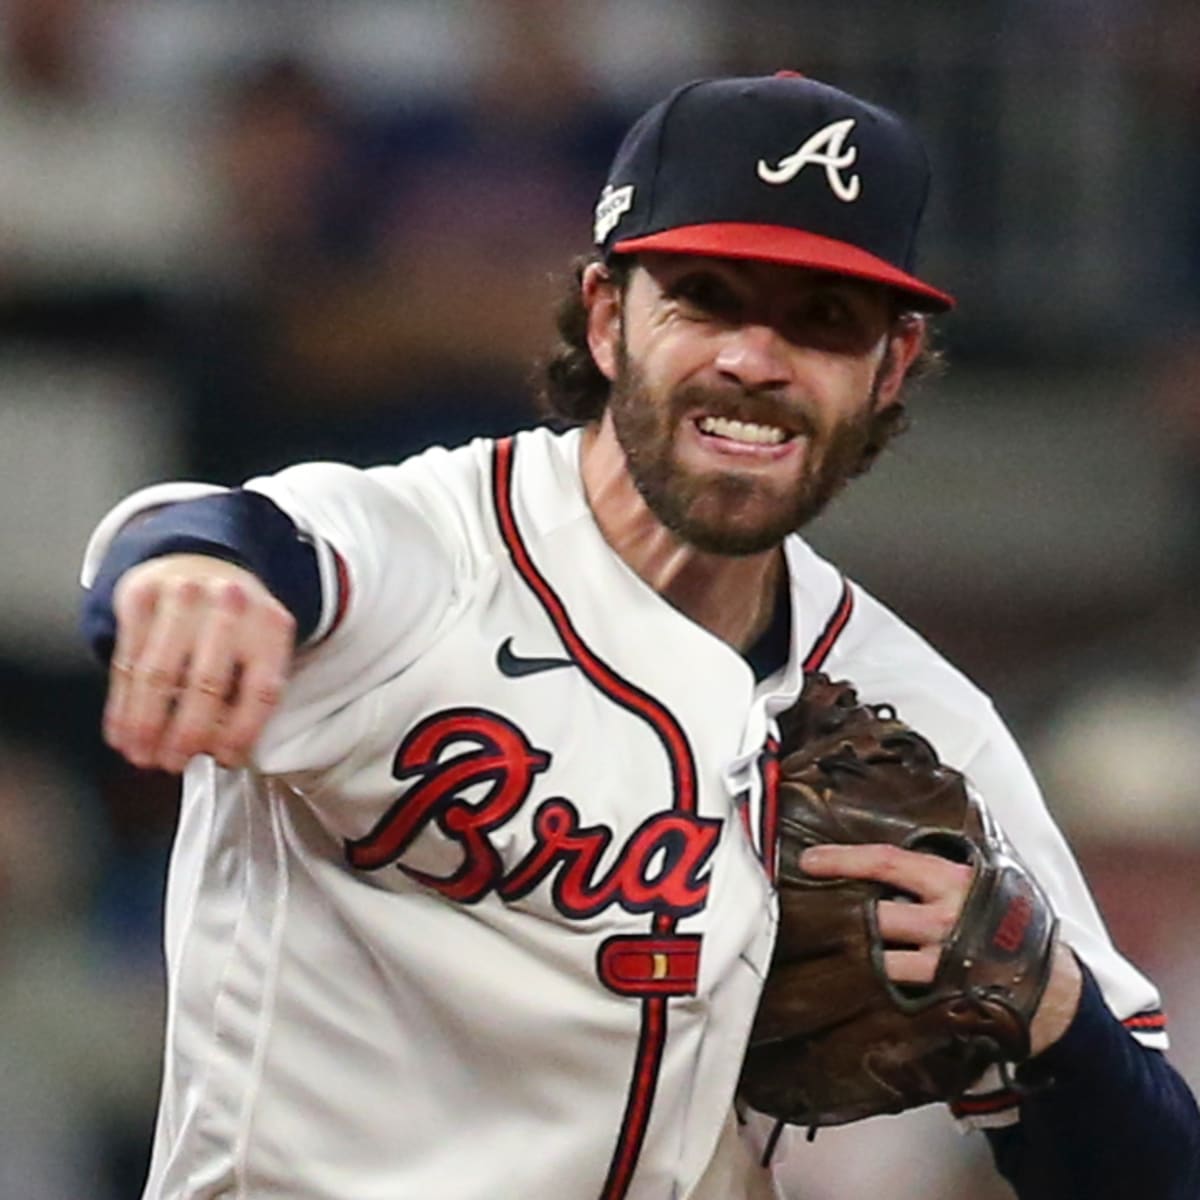 Cubs' Dansby Swanson Signing Pries Open a New Contention Window